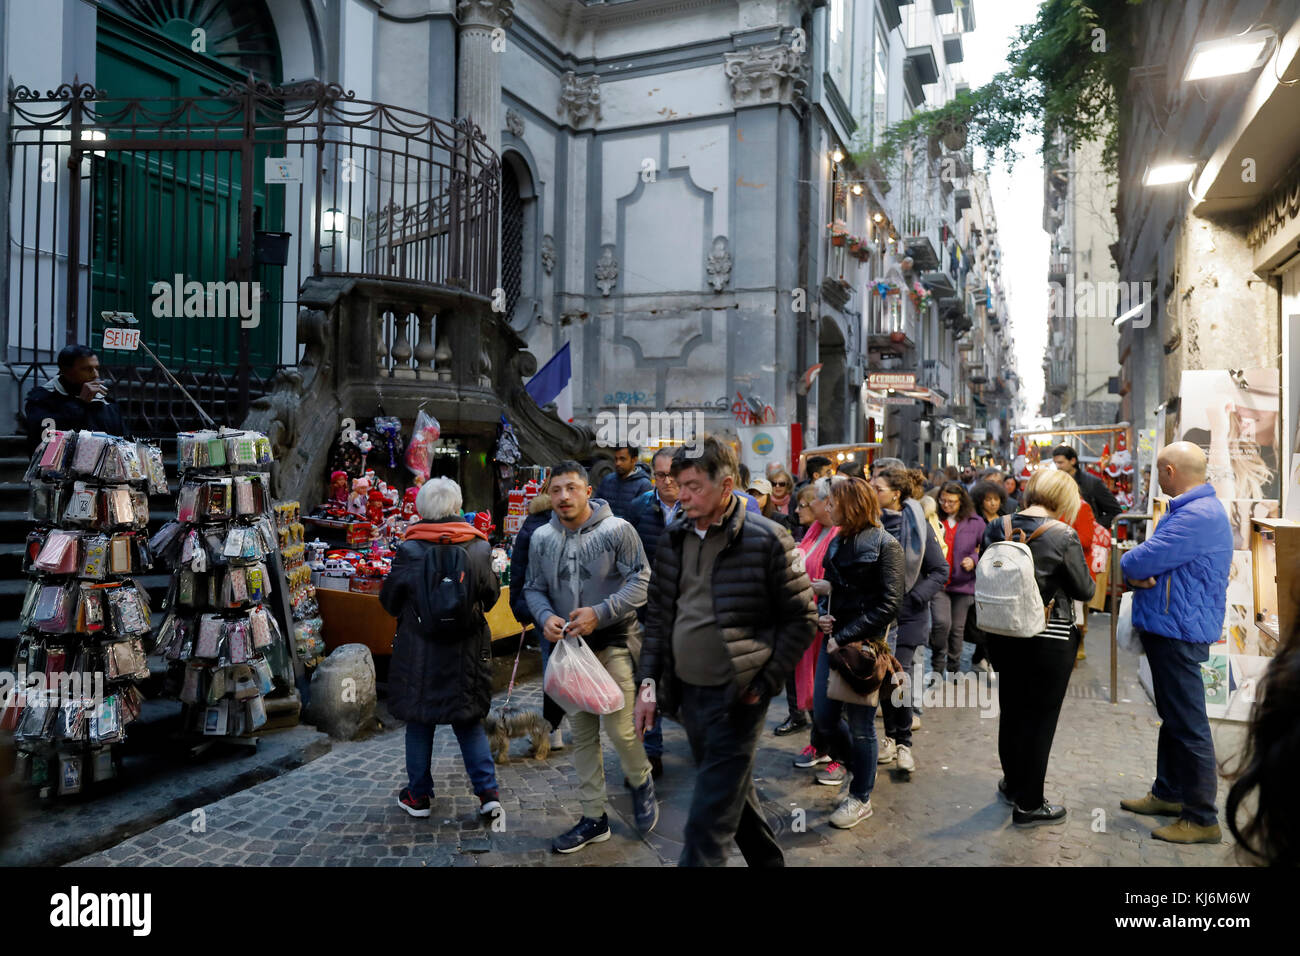 Naples, Italy - November 18, 2017: The Christmas holiday atmosphere in the heart of the city. Via San Biagio dei Librai, a famous street in the city c Stock Photo